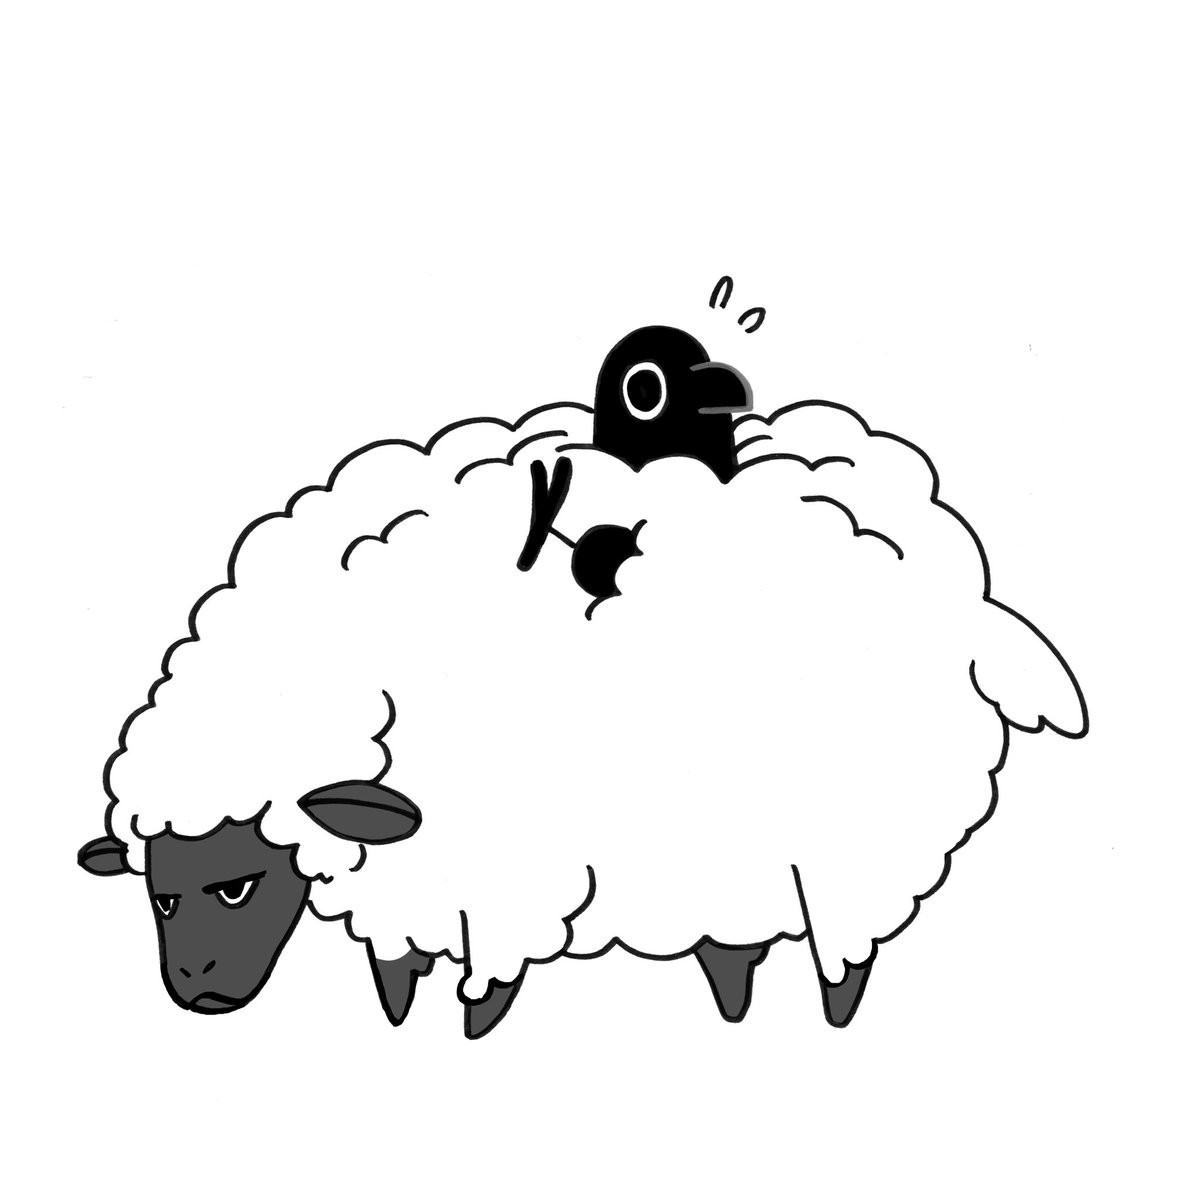 New Crow Time 🐏🐑 (2/2) 